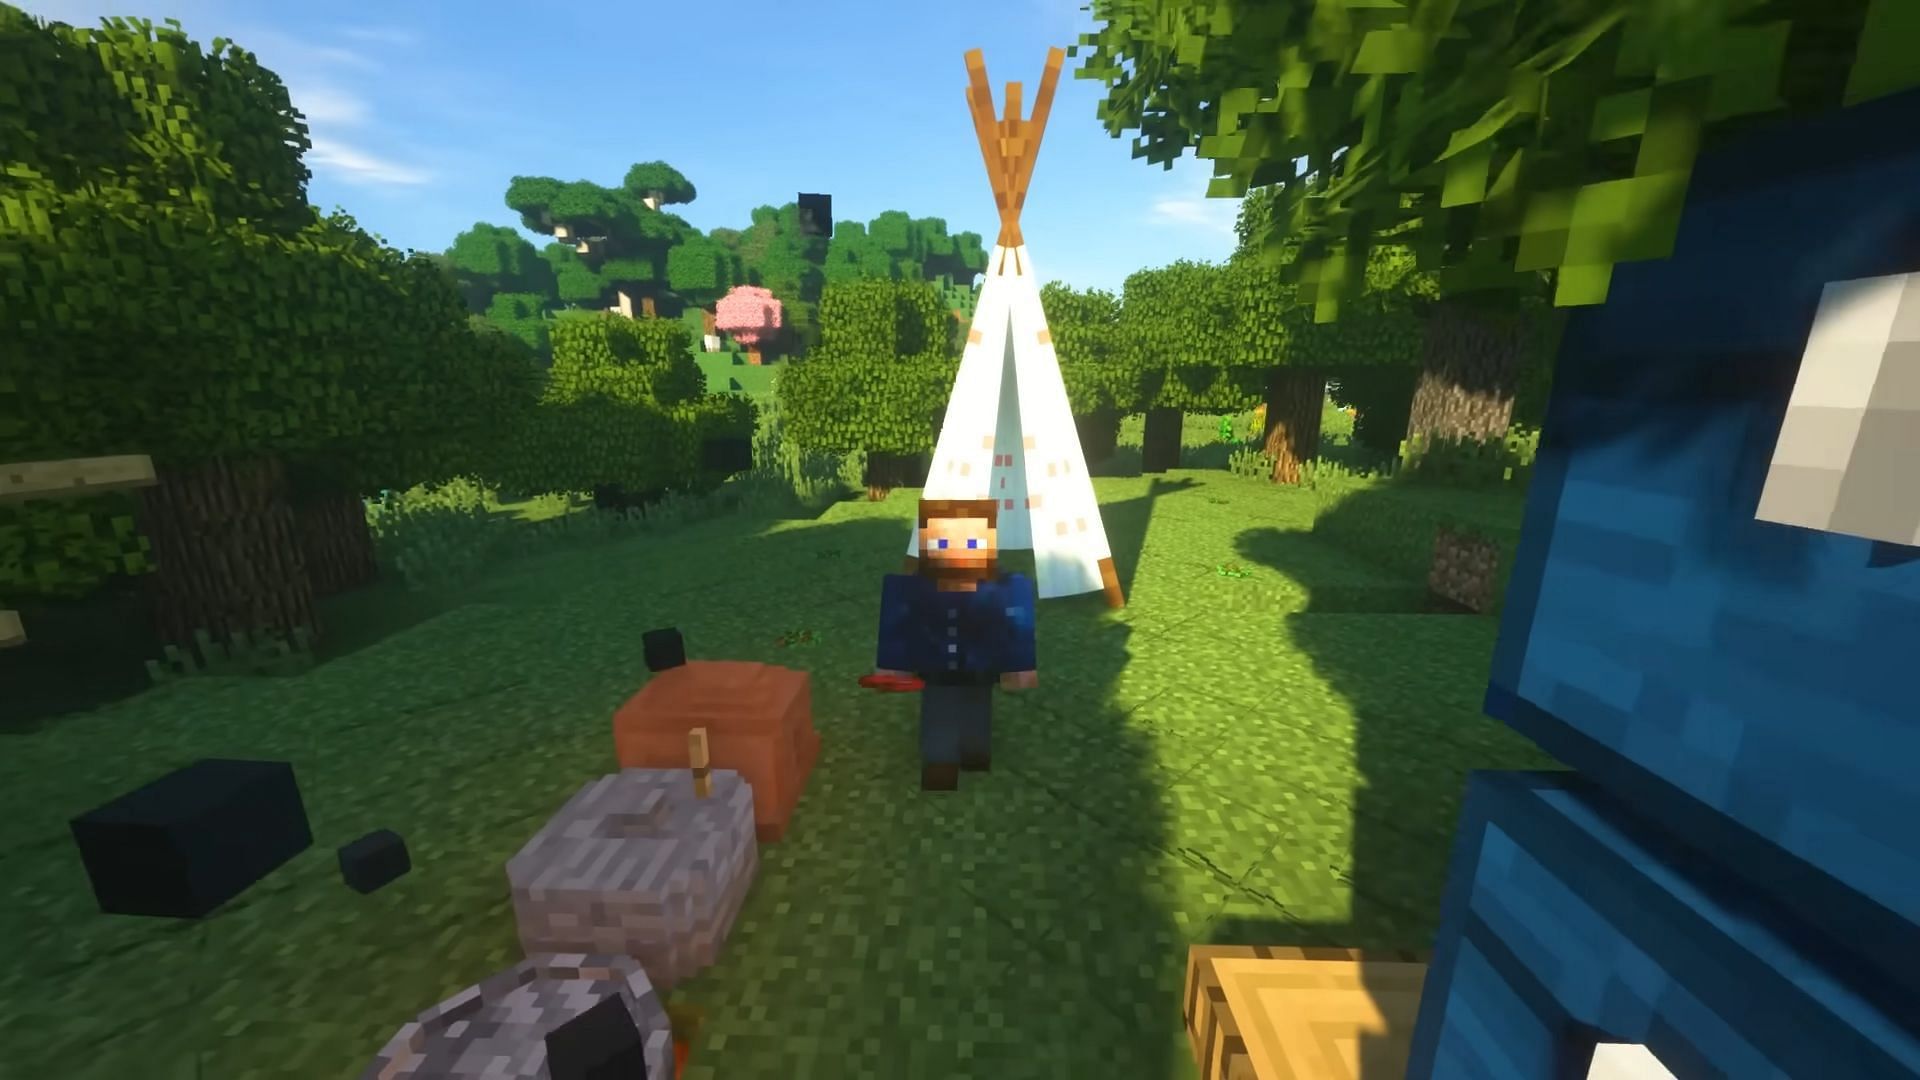 Turn Minecraft into a trip through the ages of humanity in Sevtech: Ages (Image via ChosenArchitect/YouTube)